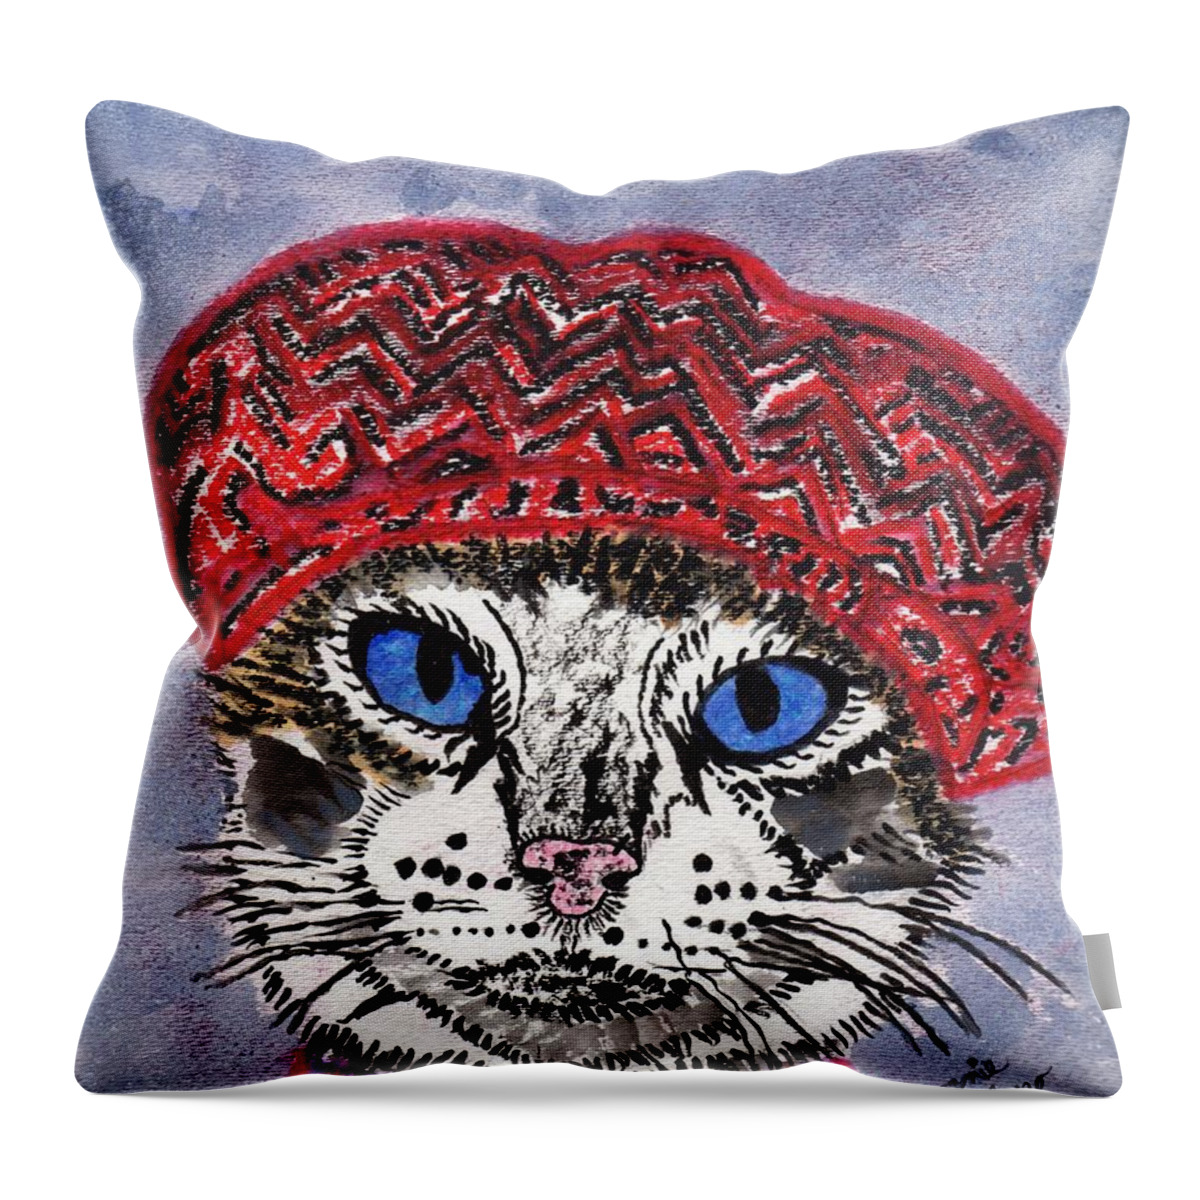 Pairs Throw Pillow featuring the painting Pairs my dear by Connie Valasco